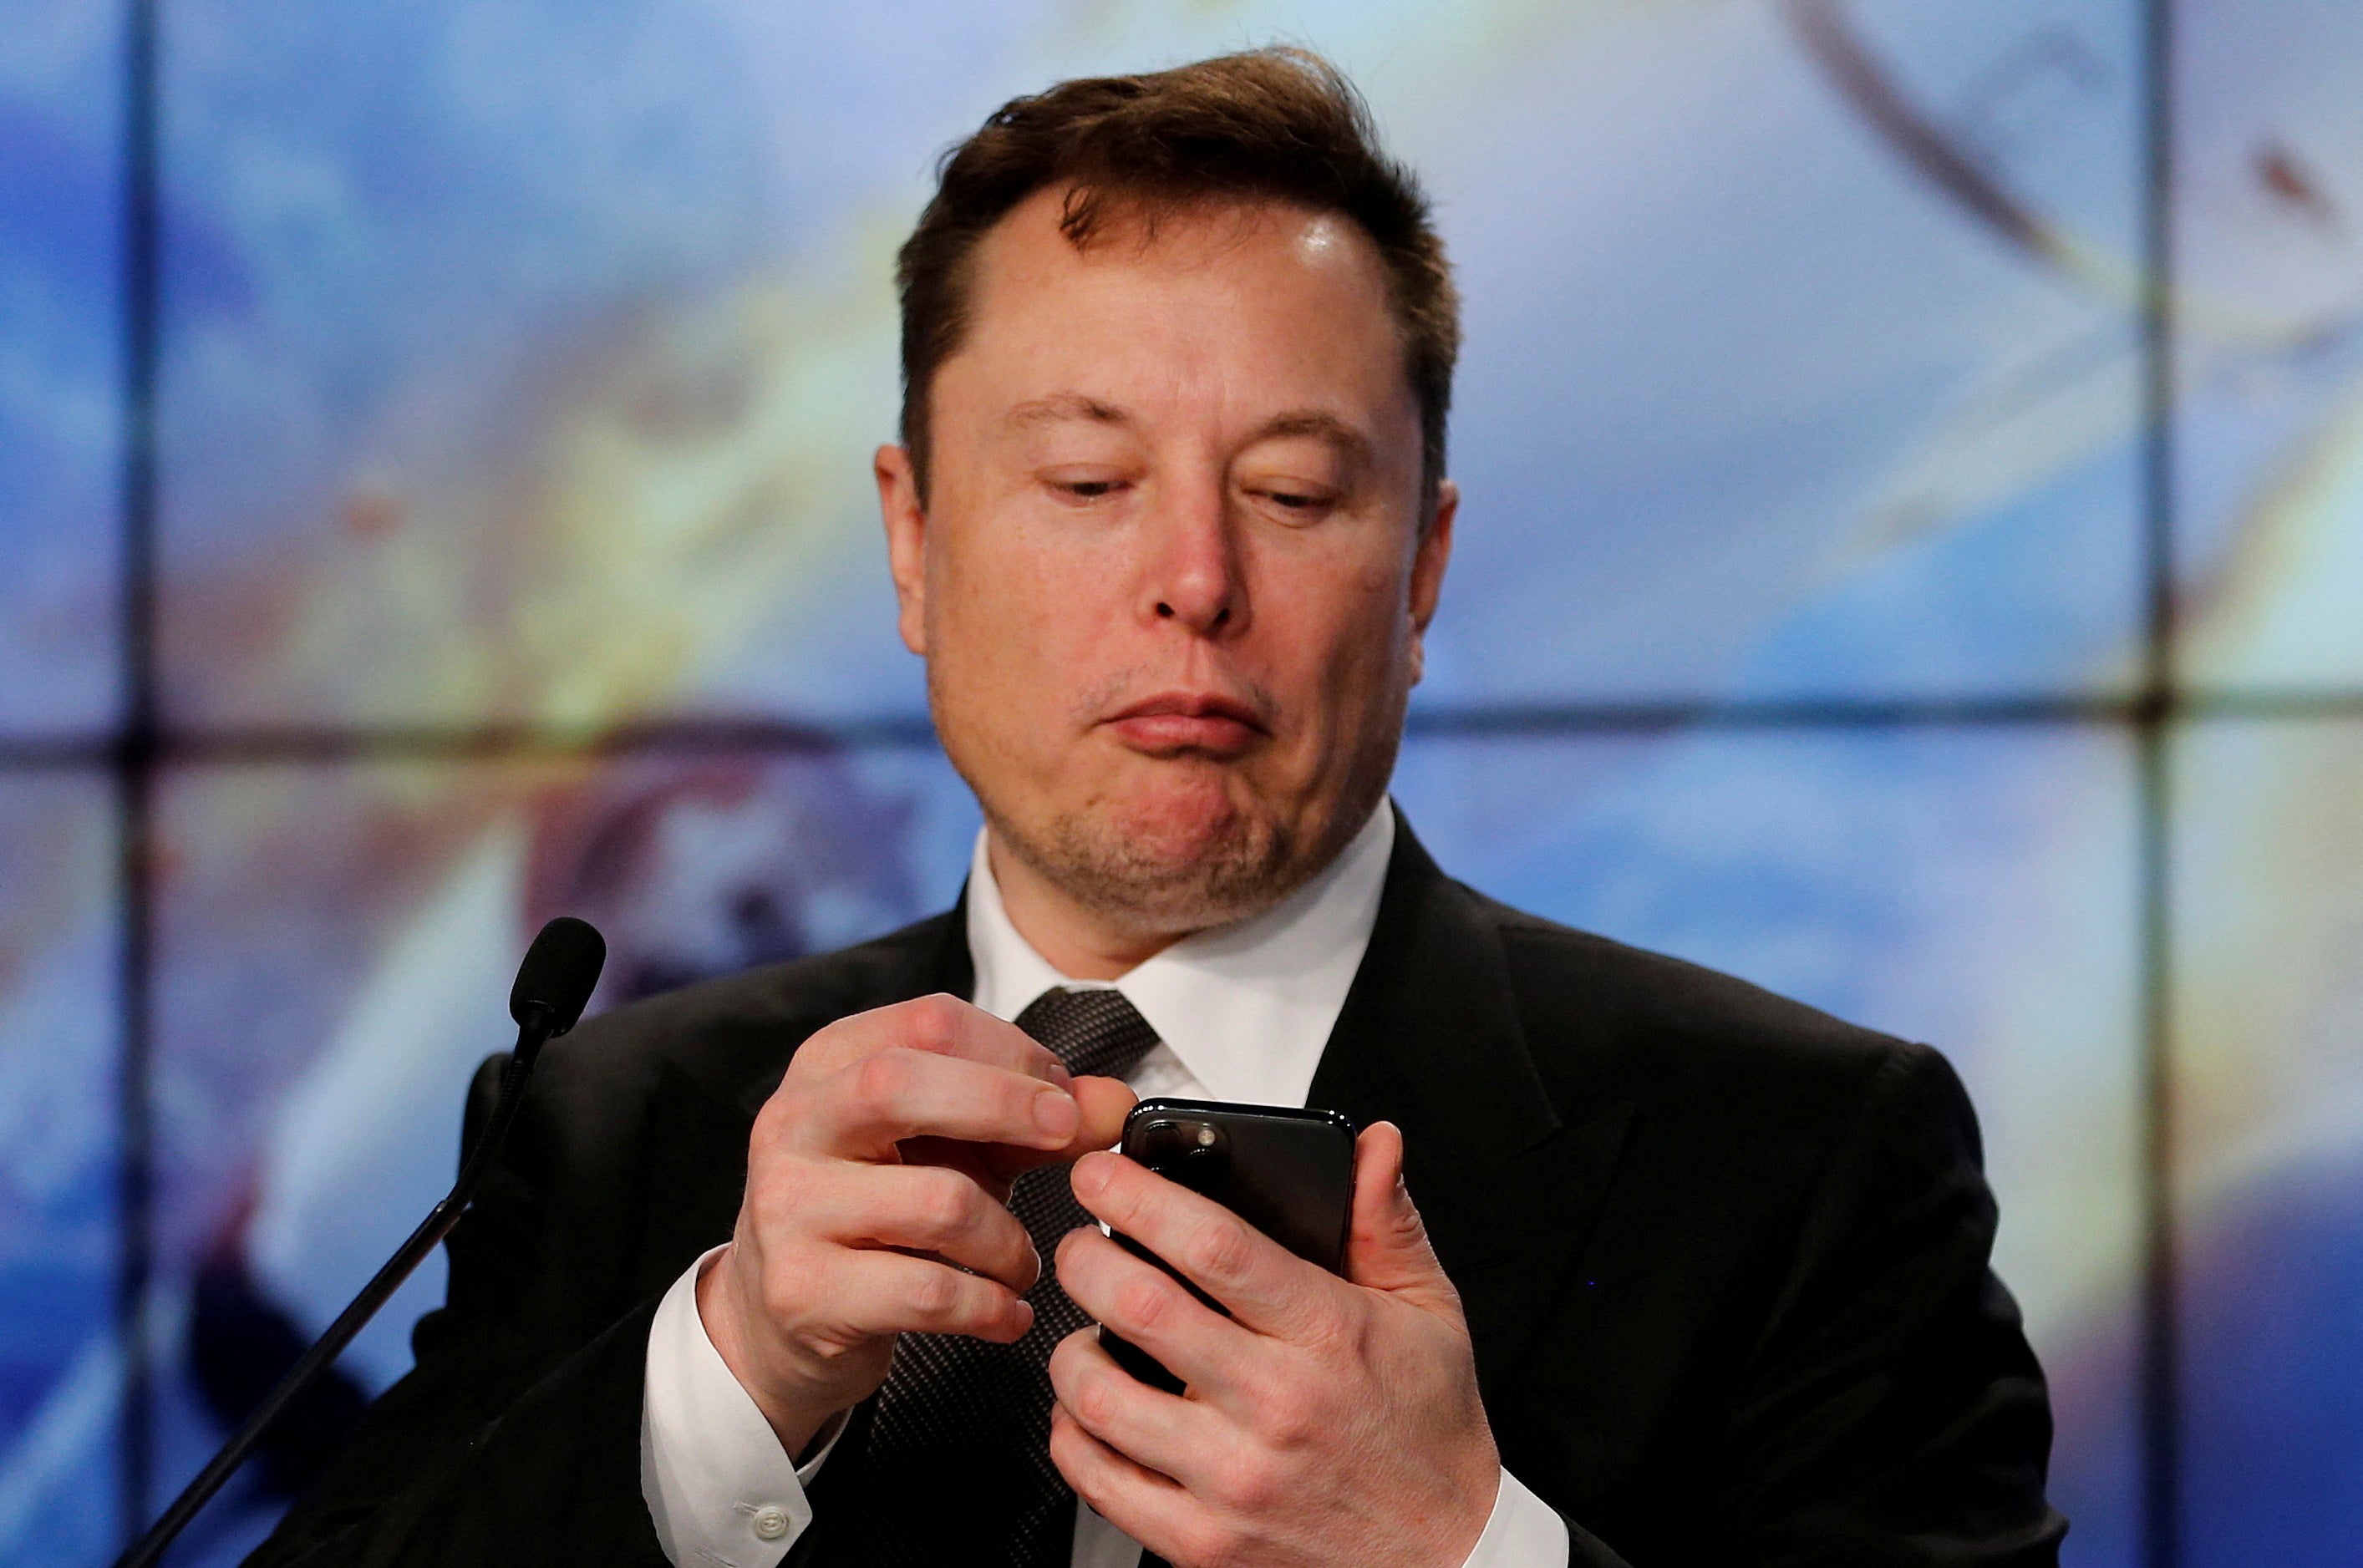 SpaceX founder and chief engineer Elon Musk looks at his mobile phone in Cape Canaveral, Florida, U.S. January 19, 2020